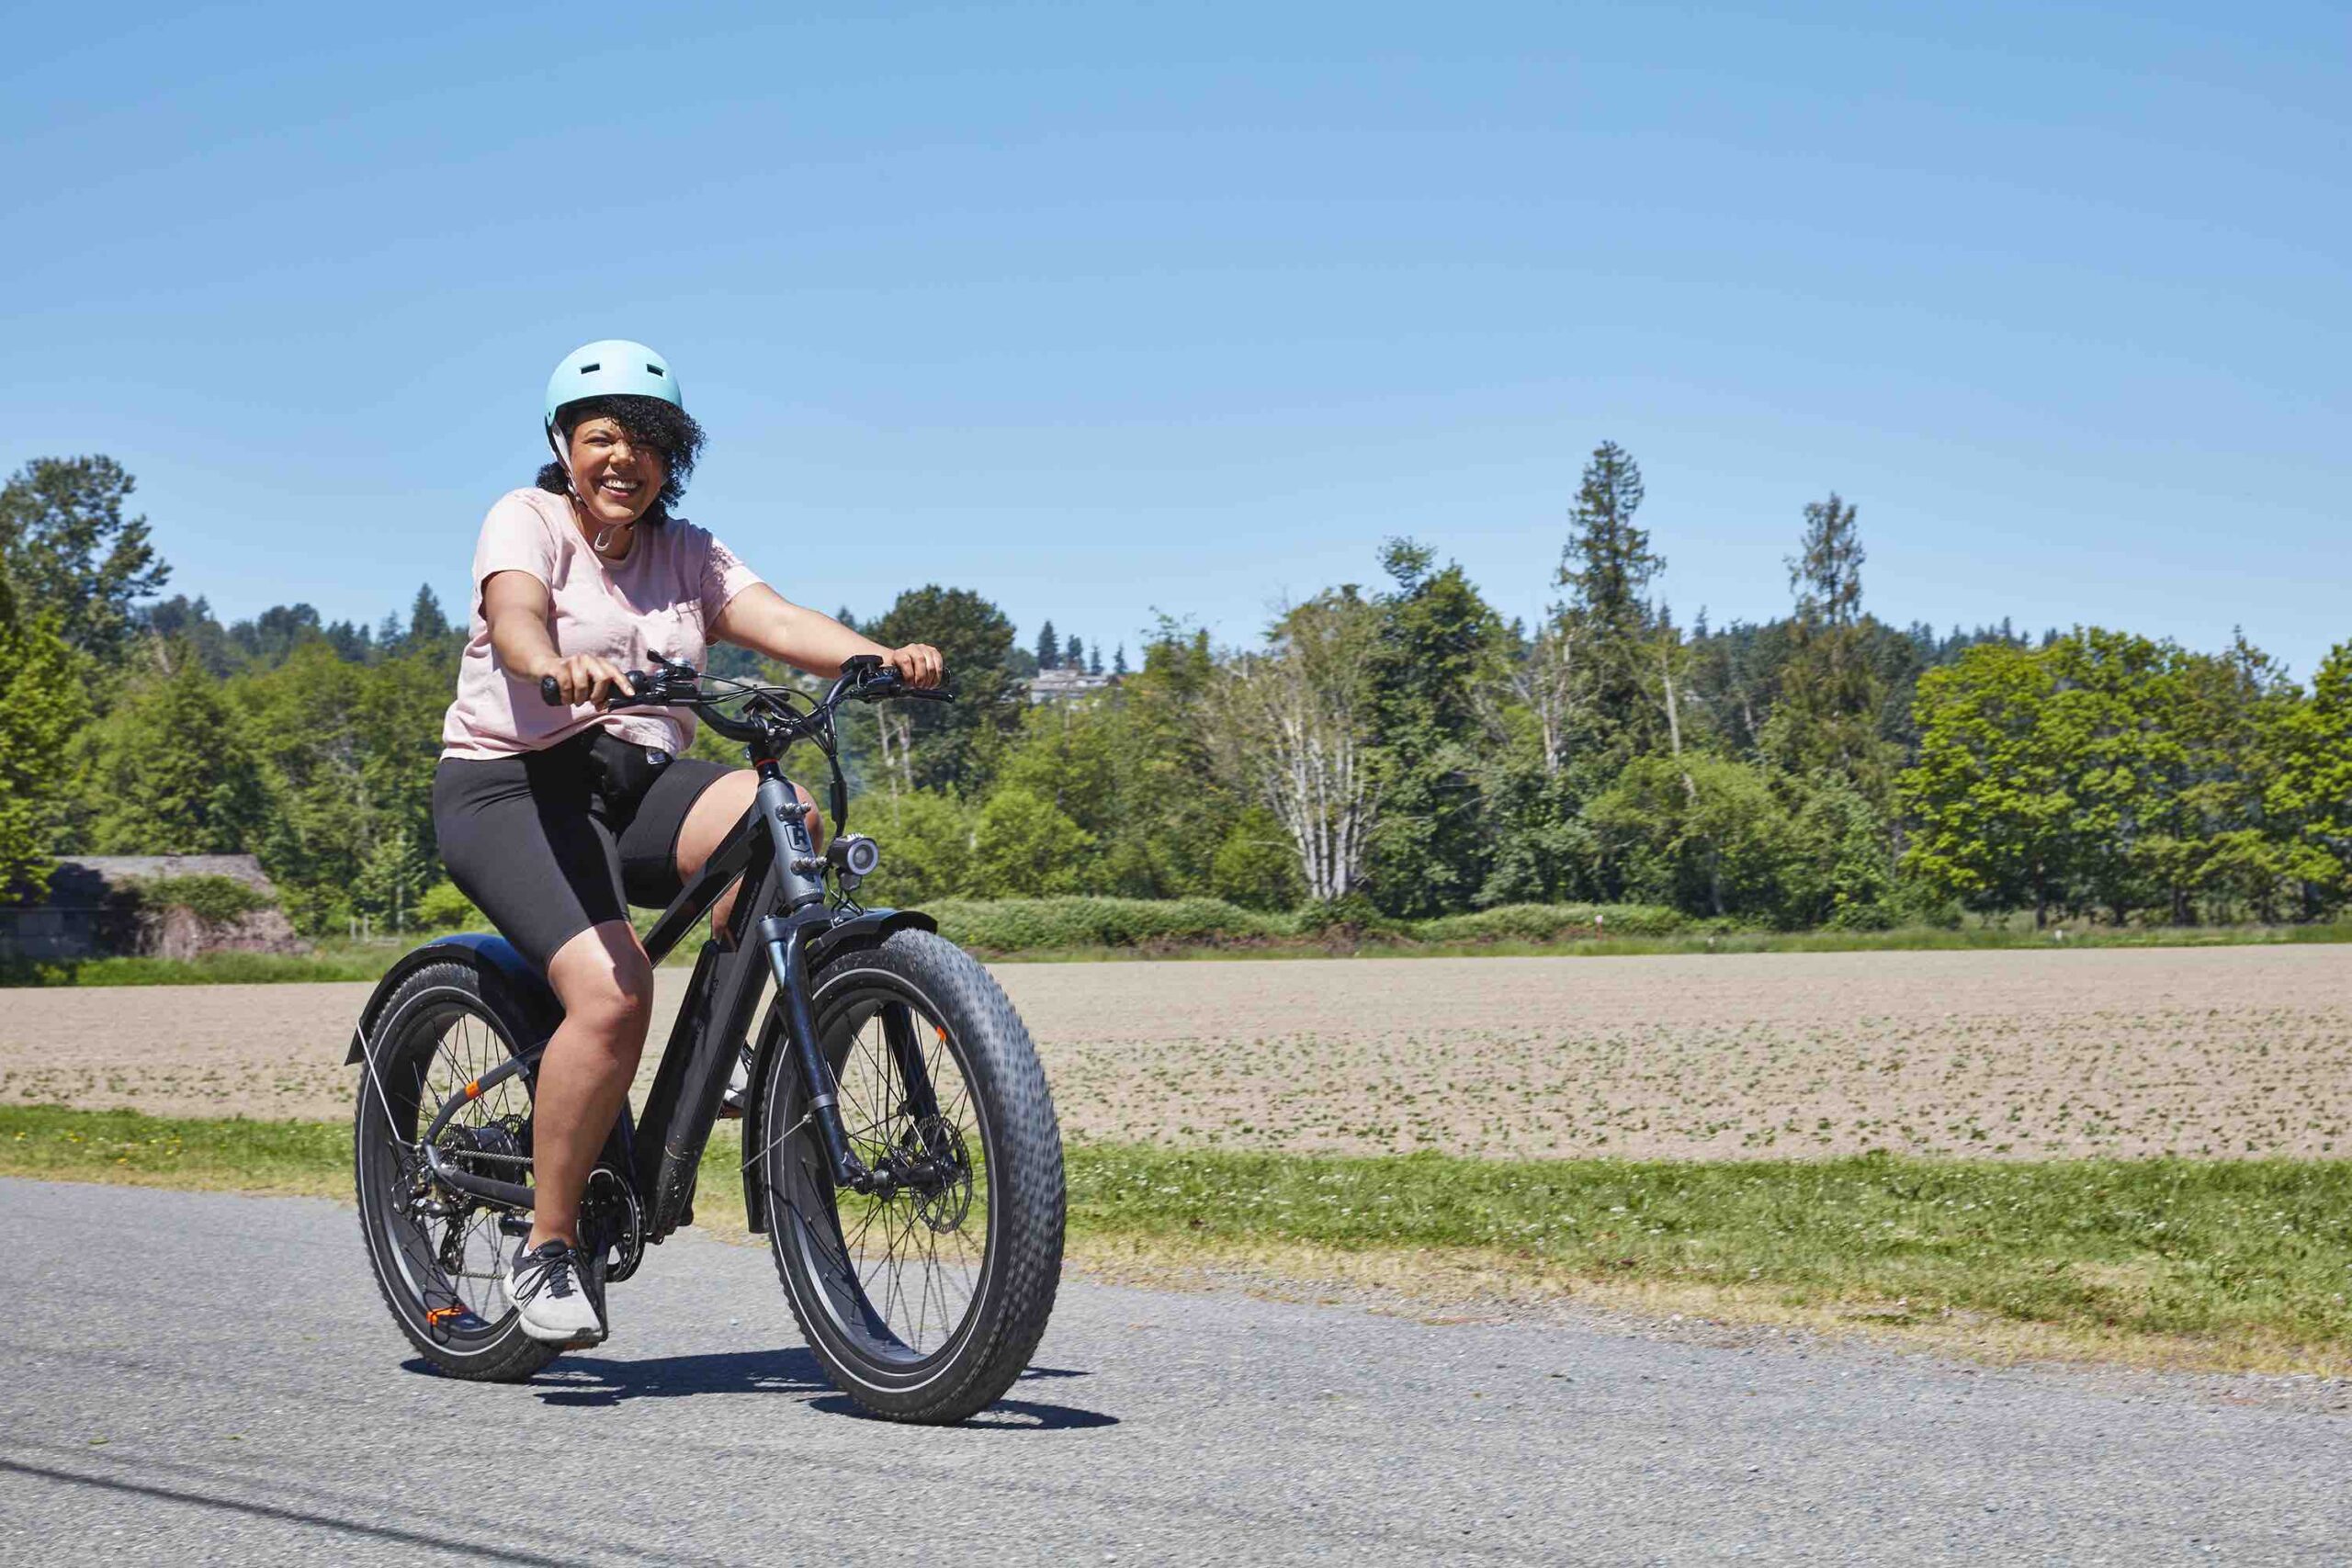 Gas Prices Reach 5 per Gallon Discover How an Ebike Can Help You Cut Costsb4d122824 1 scaled